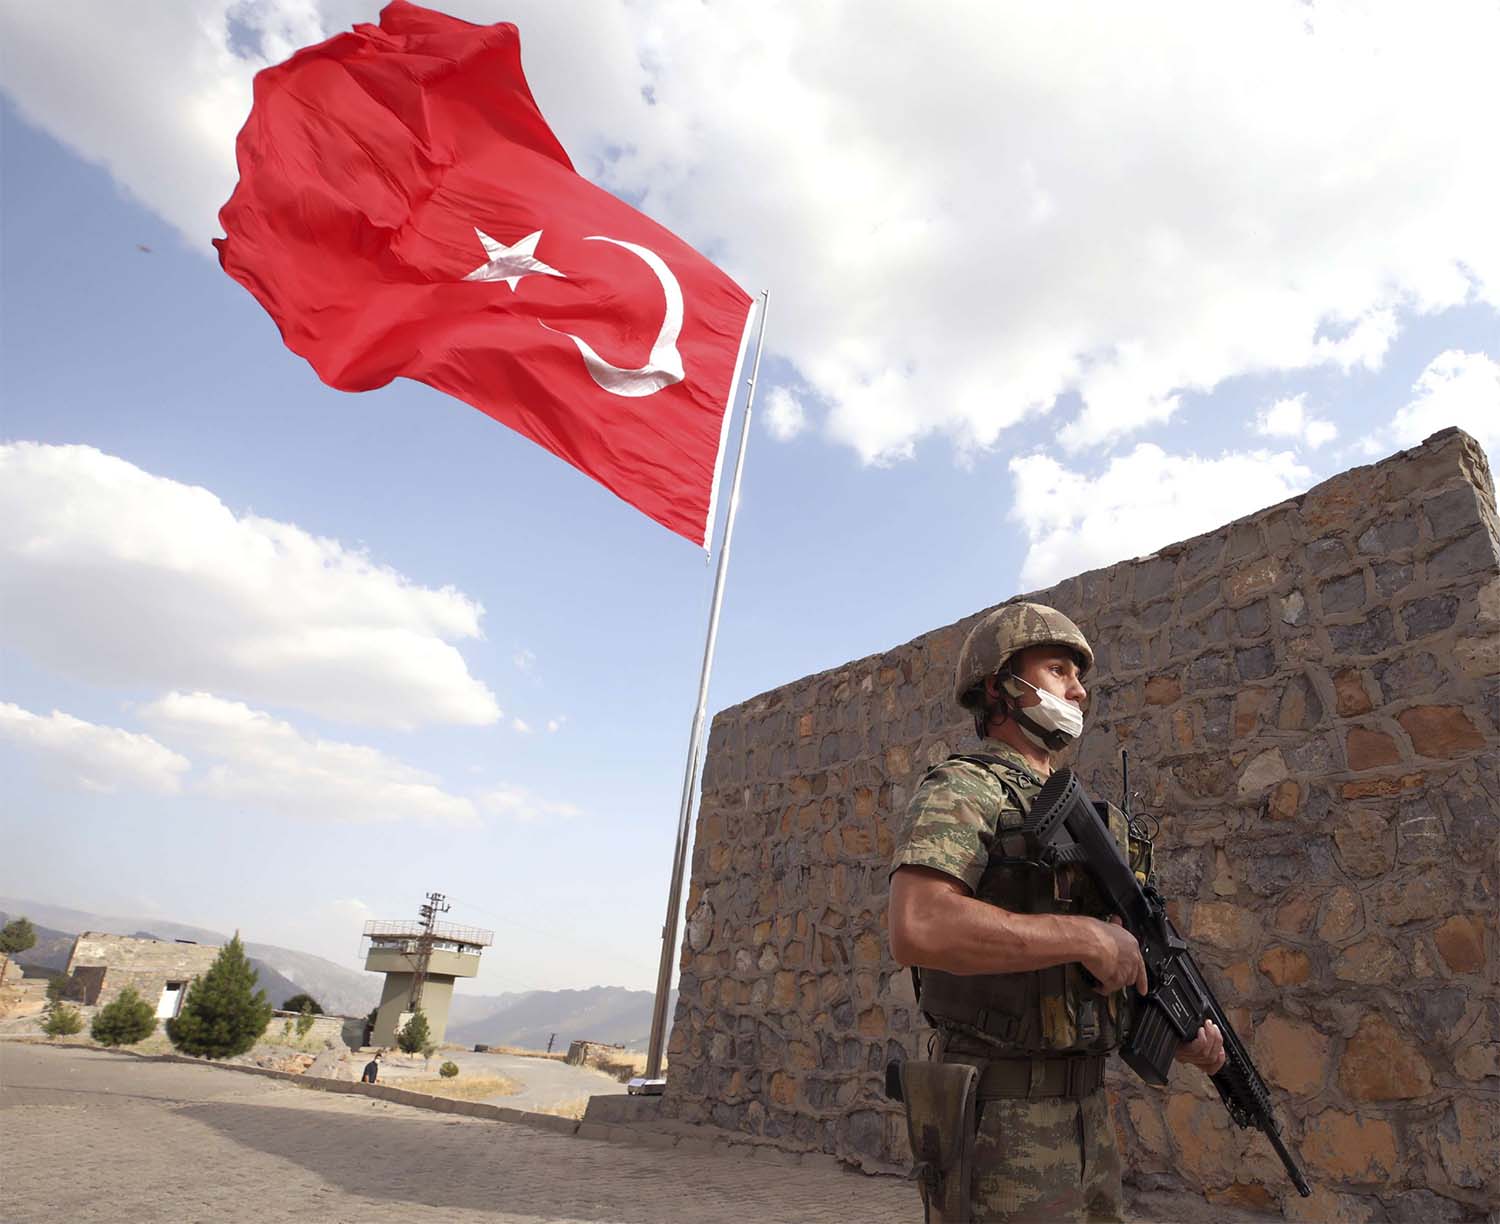 Turkey has regularly attacked Kurdish militants, both in its mainly Kurdish southeast and in northern Iraq